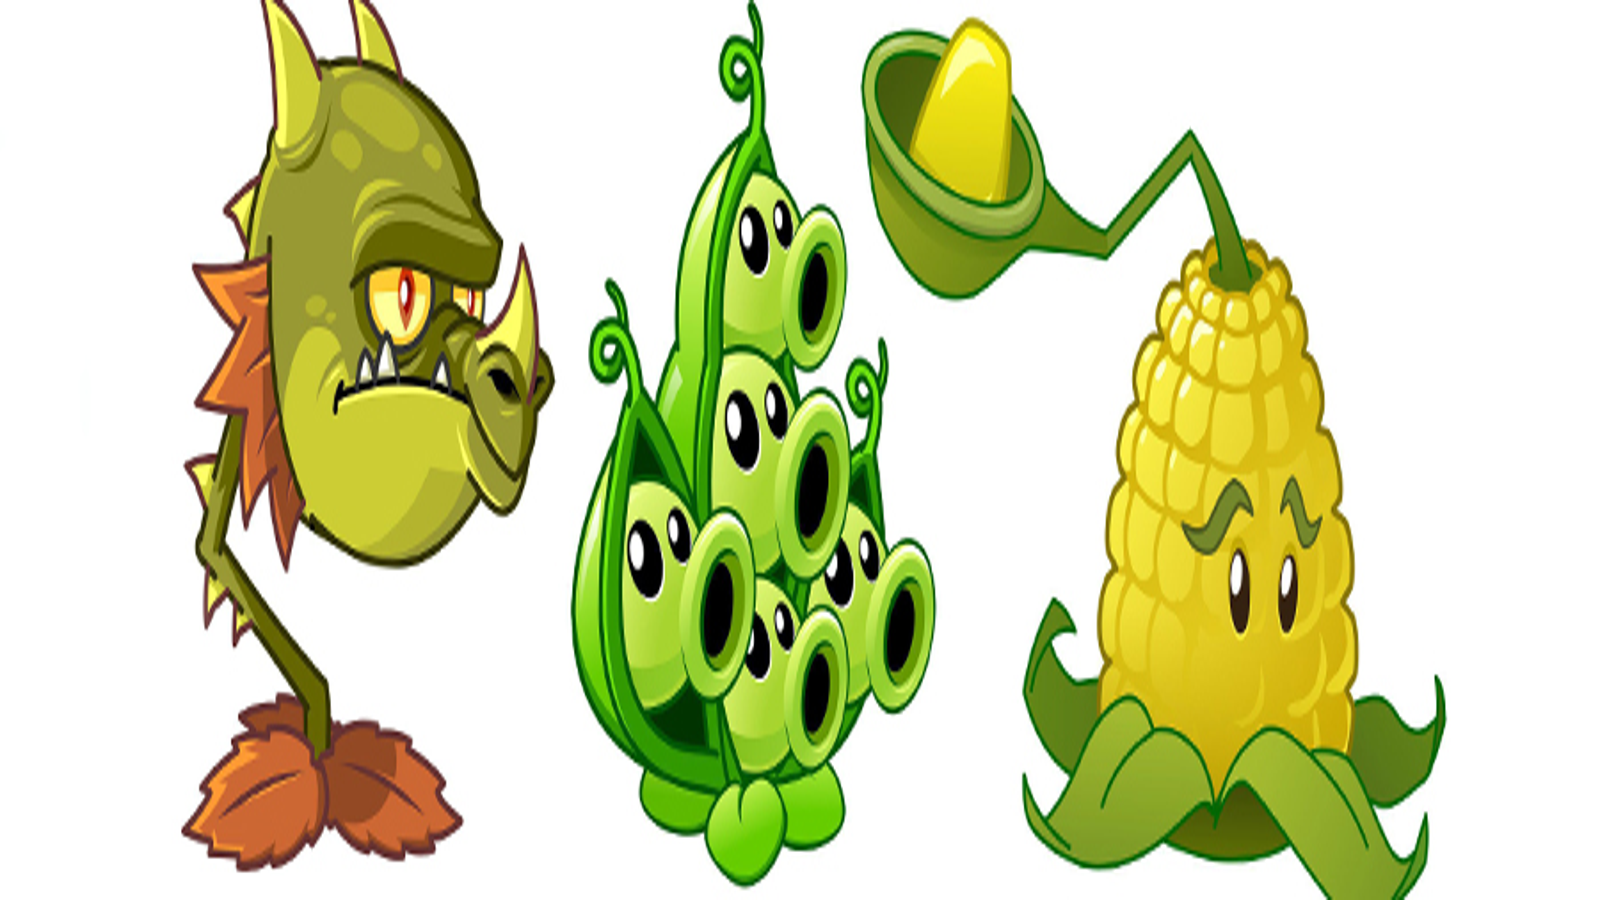 Plants Vs. Zombies 2 Launches On Android